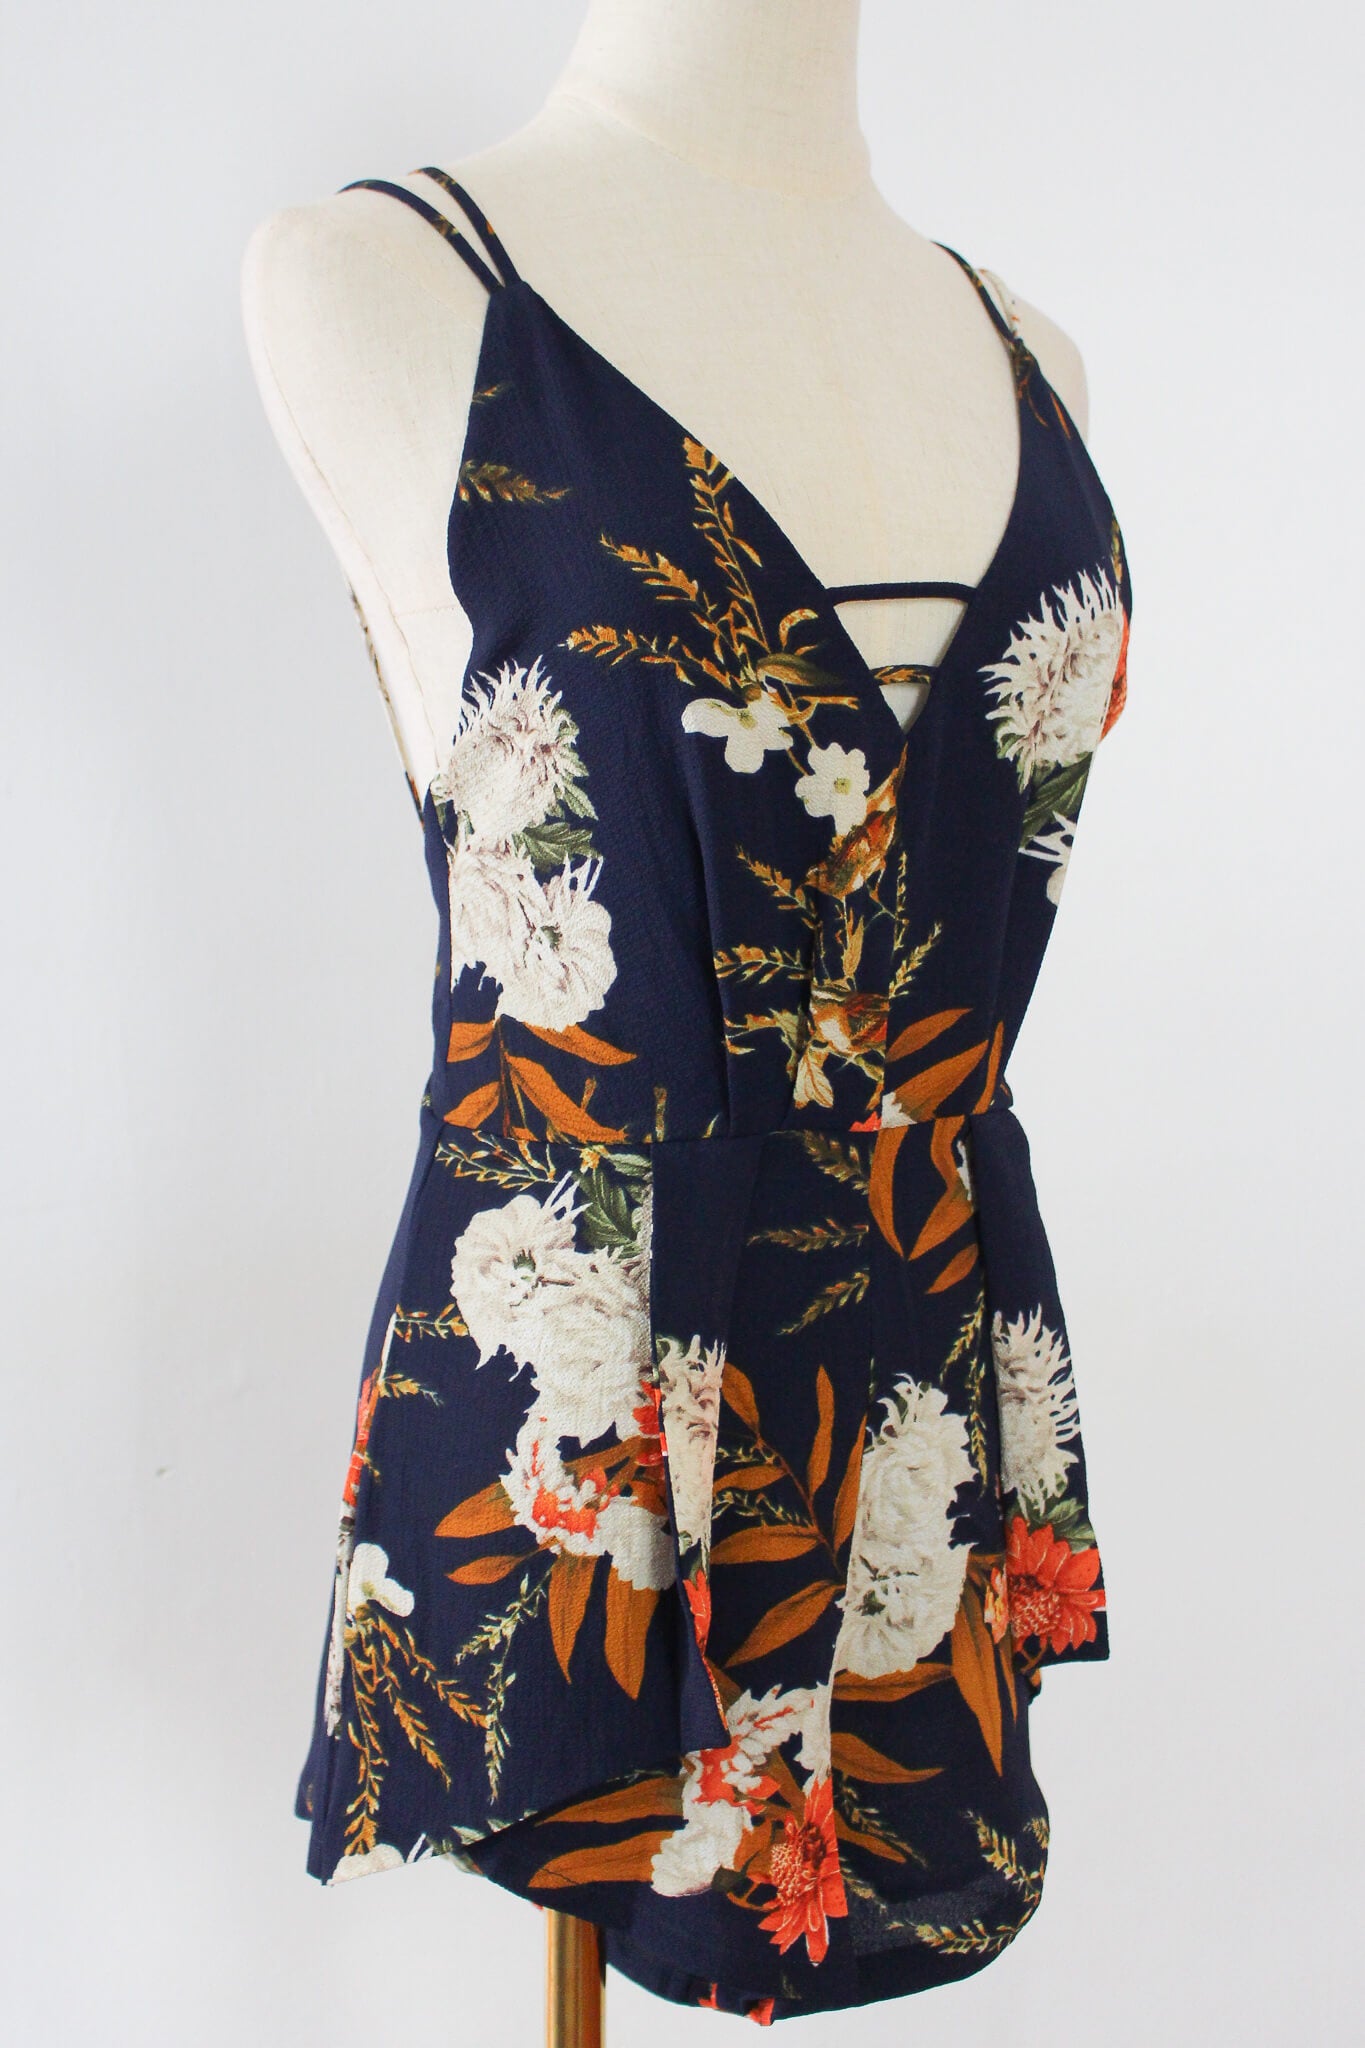 V neck crossback printed romper perfect coverup for the beach